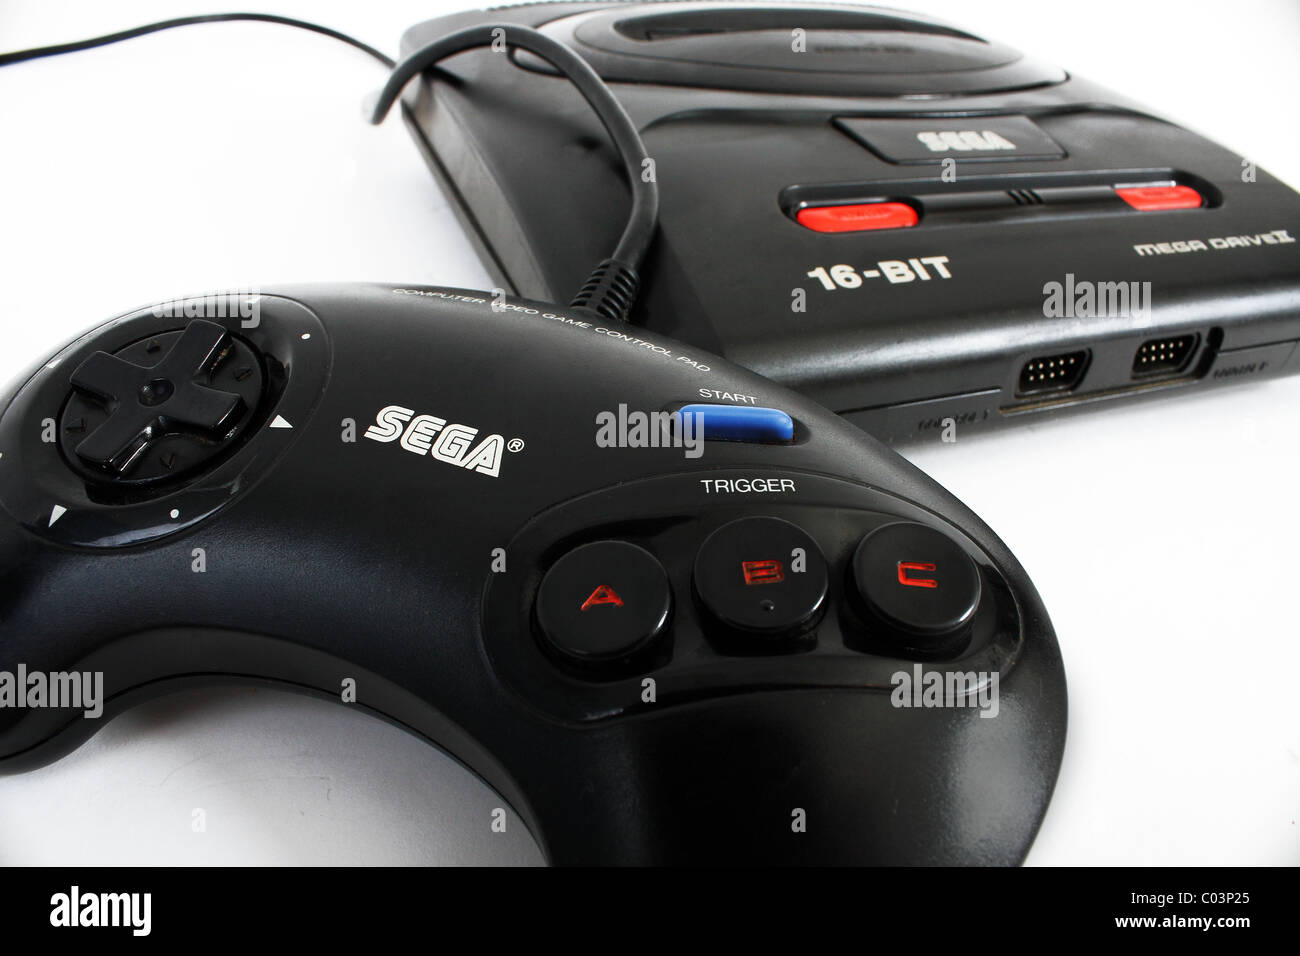 An old retro gaming video games console system called the Sega Mega Drive 16 Bit with handheld controller Stock Photo